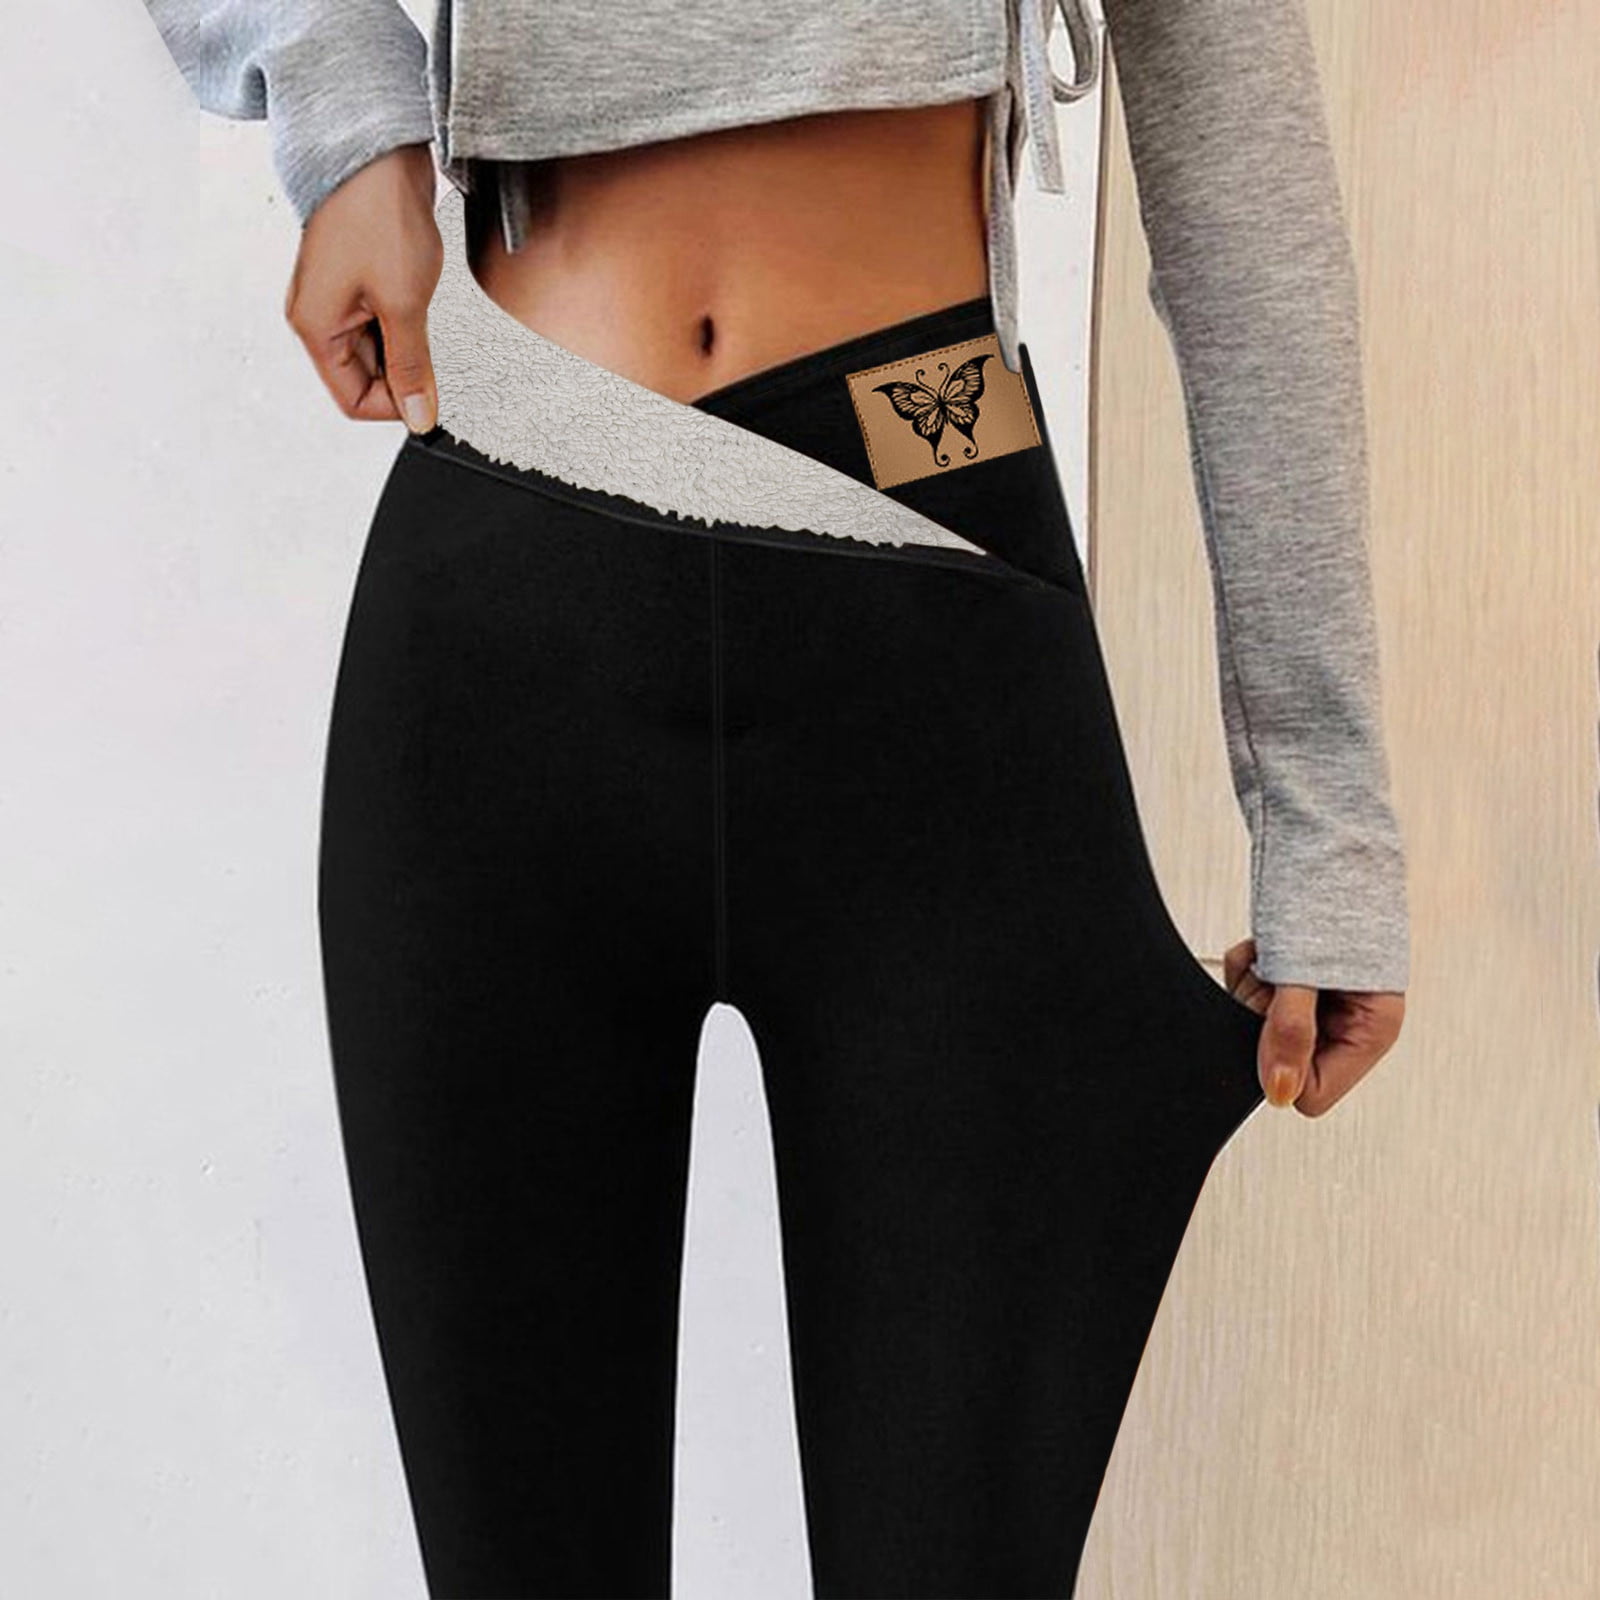 ZQGJB Super Thick Cashmere Leggings for Women - Cute Butterfly